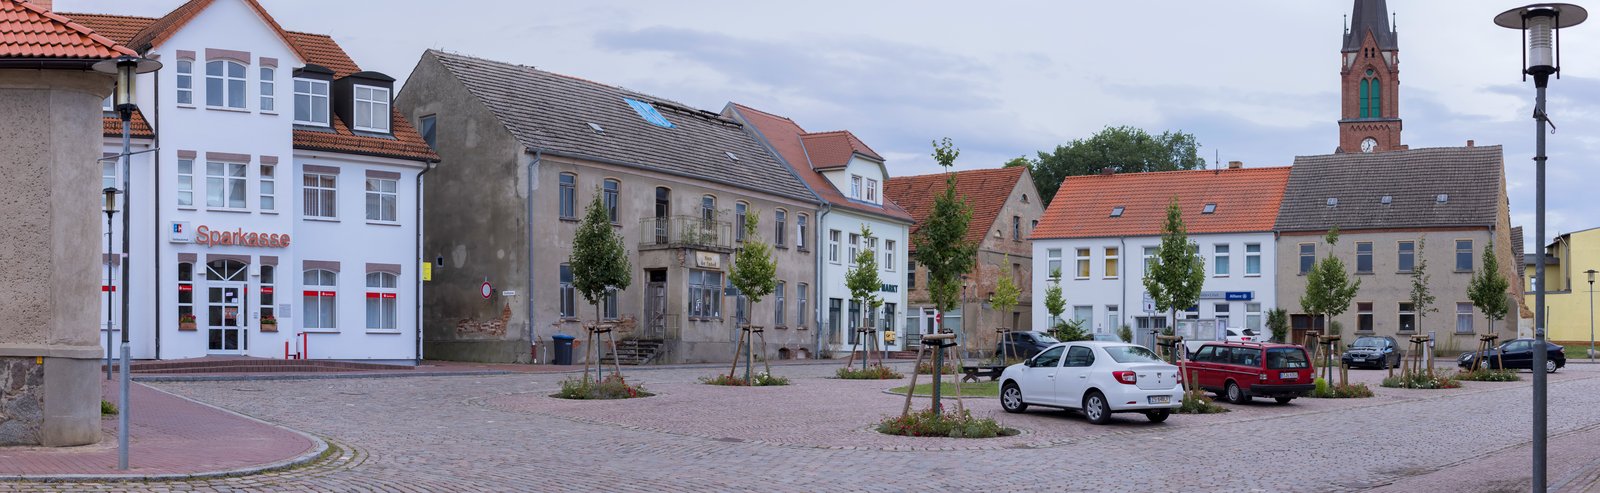 Buildings, Cars and the Street at Penkun Market Square